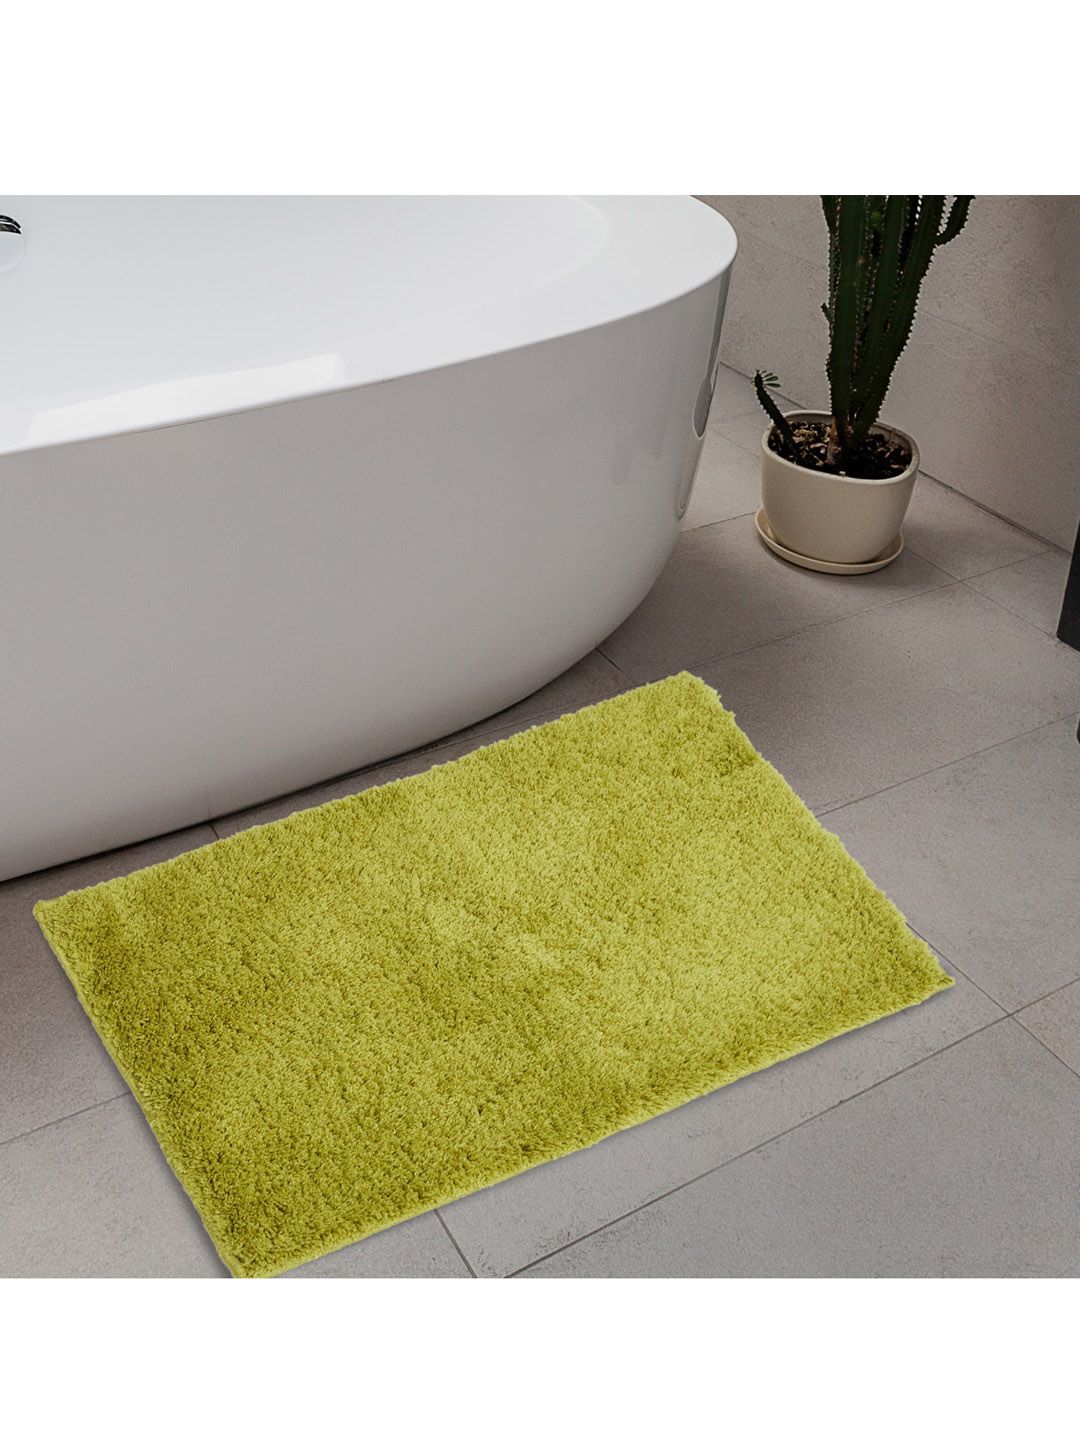 Home Centre Green Textured Rectangle Bath Rug Price in India